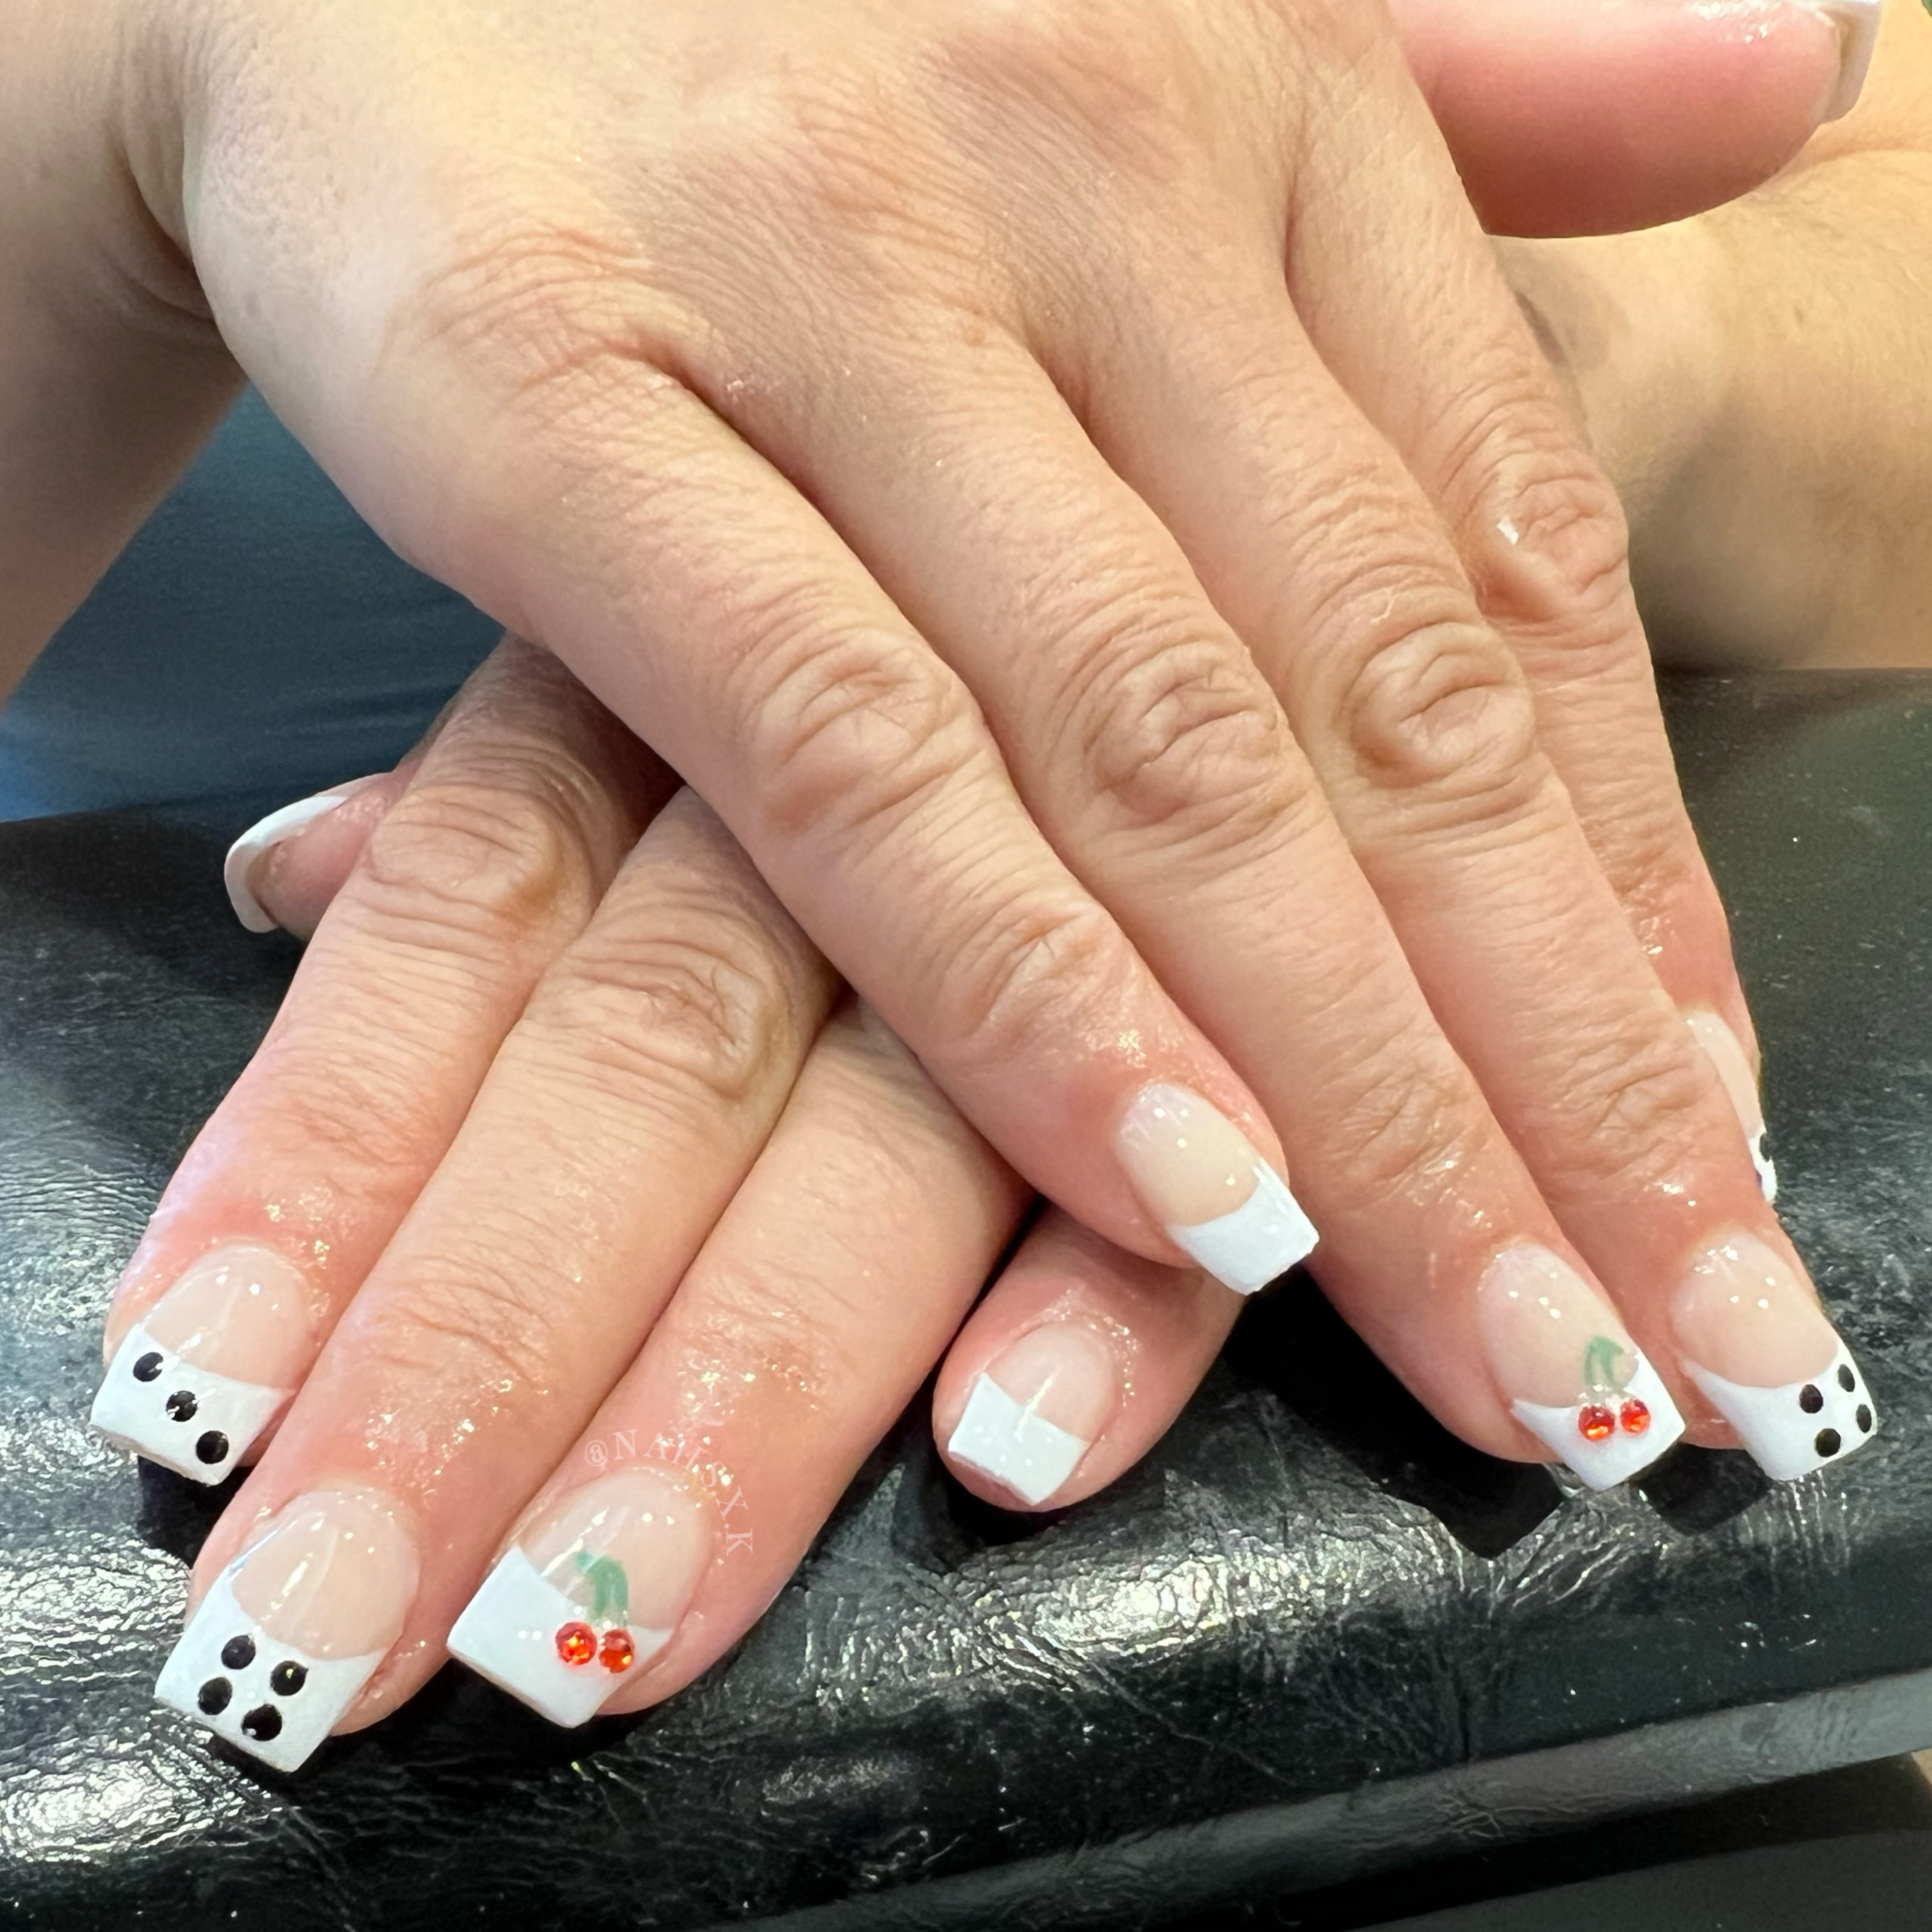 Short acrylic set with french tips with a Las Vegas vibe. Nails by K